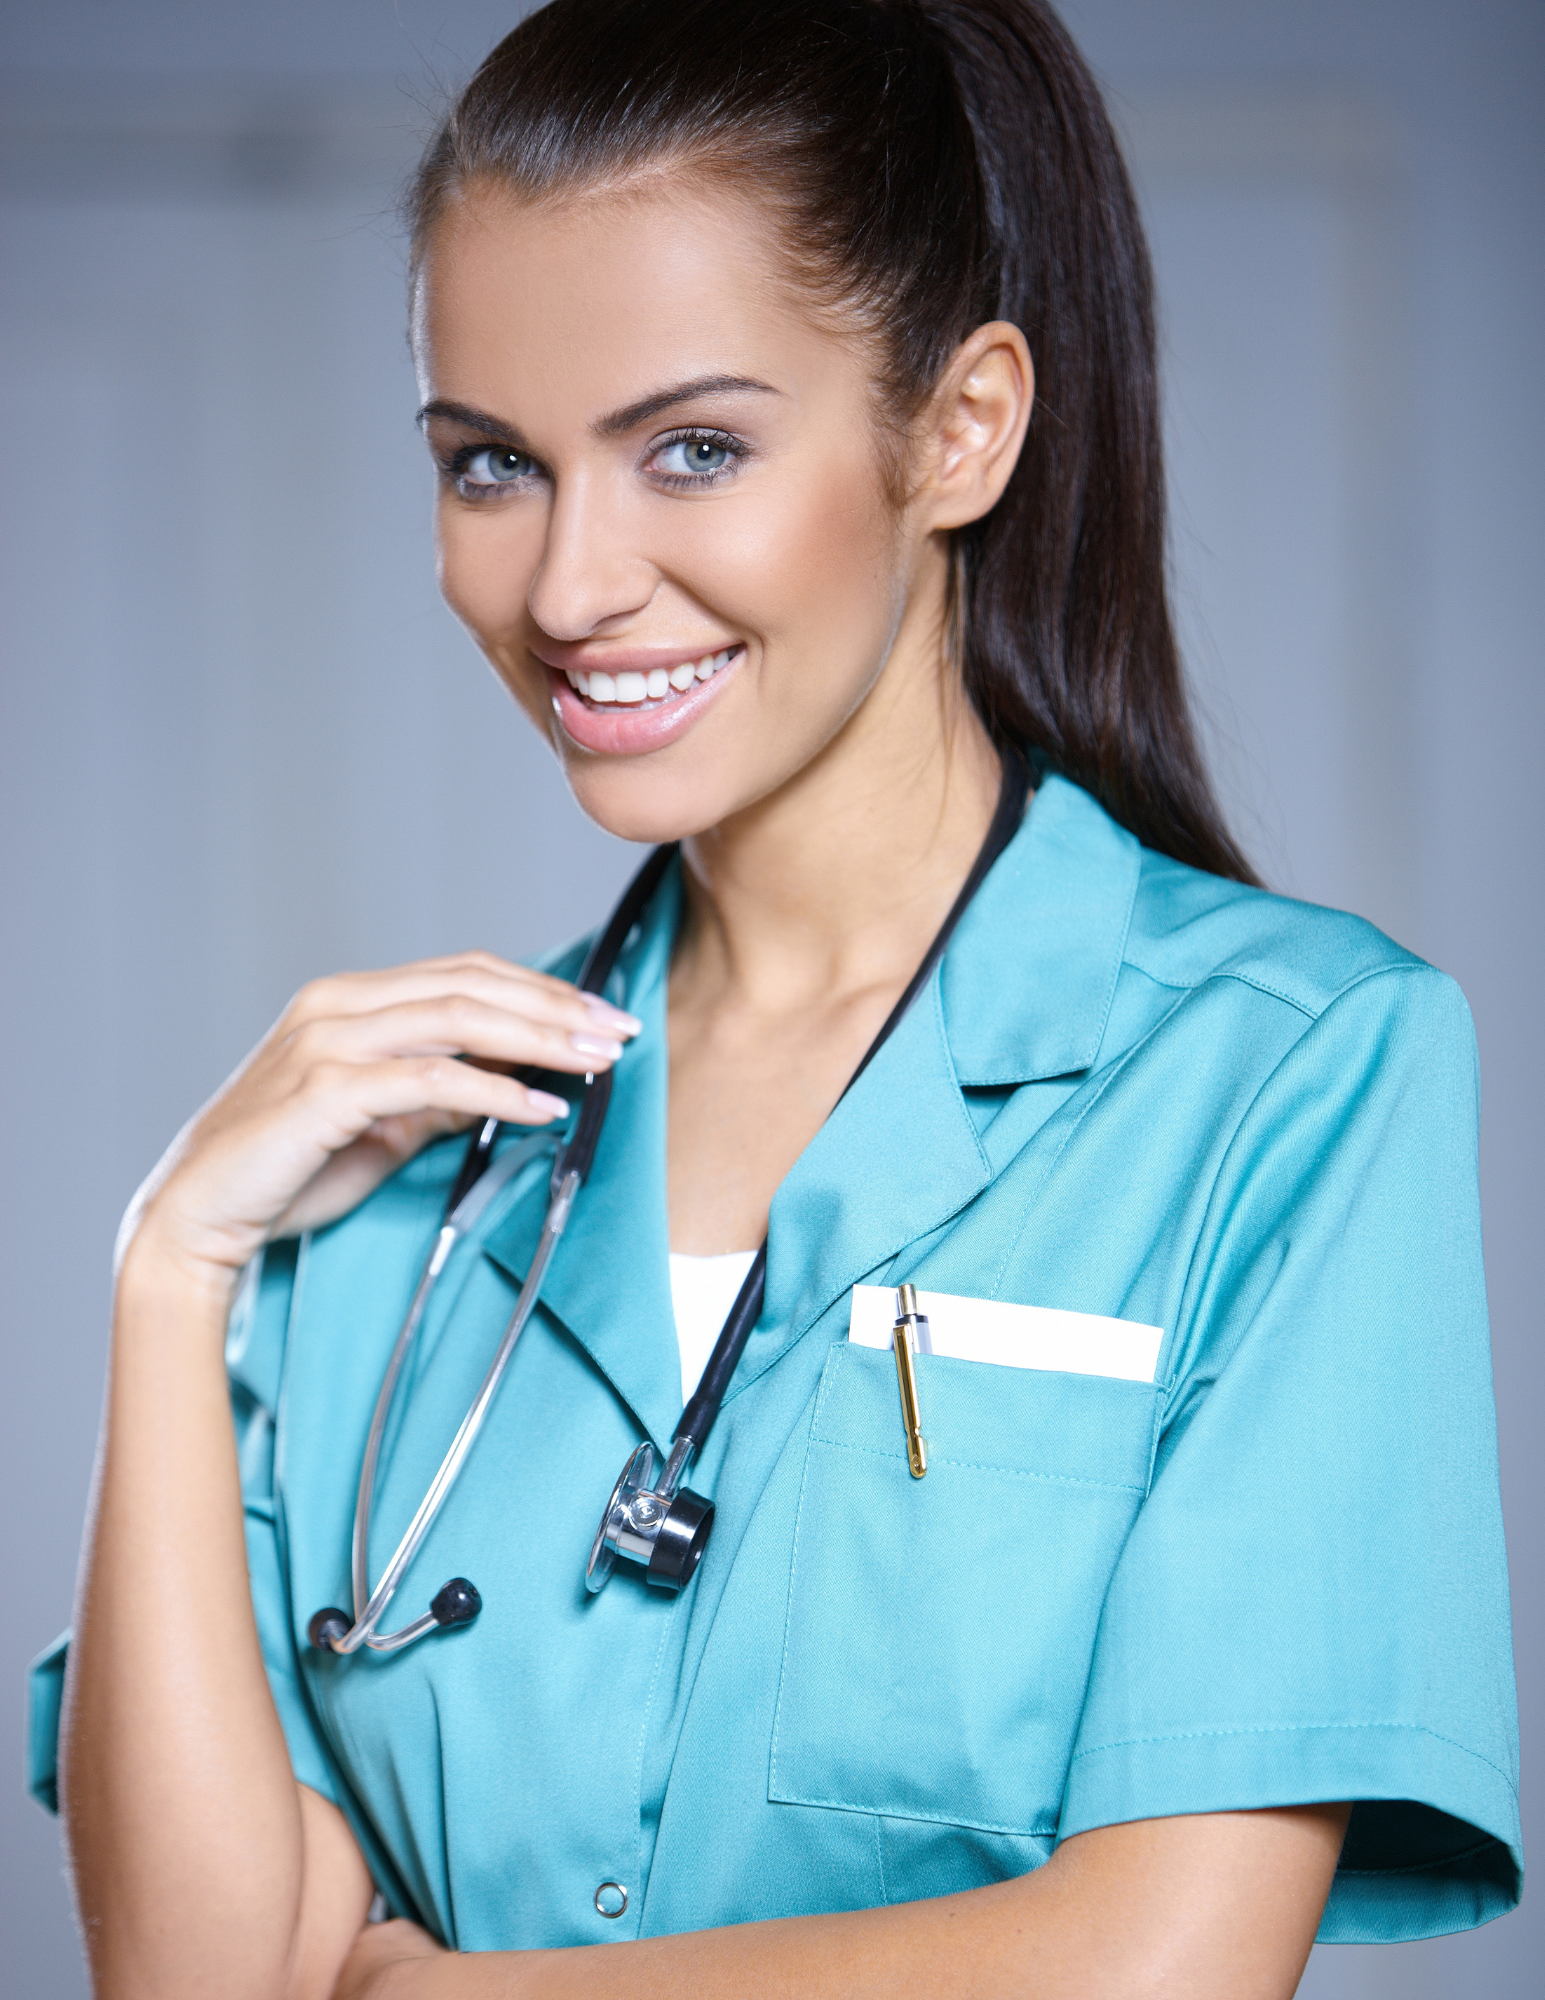 Female doctor in blue scrubs with a stethoscope around her neck